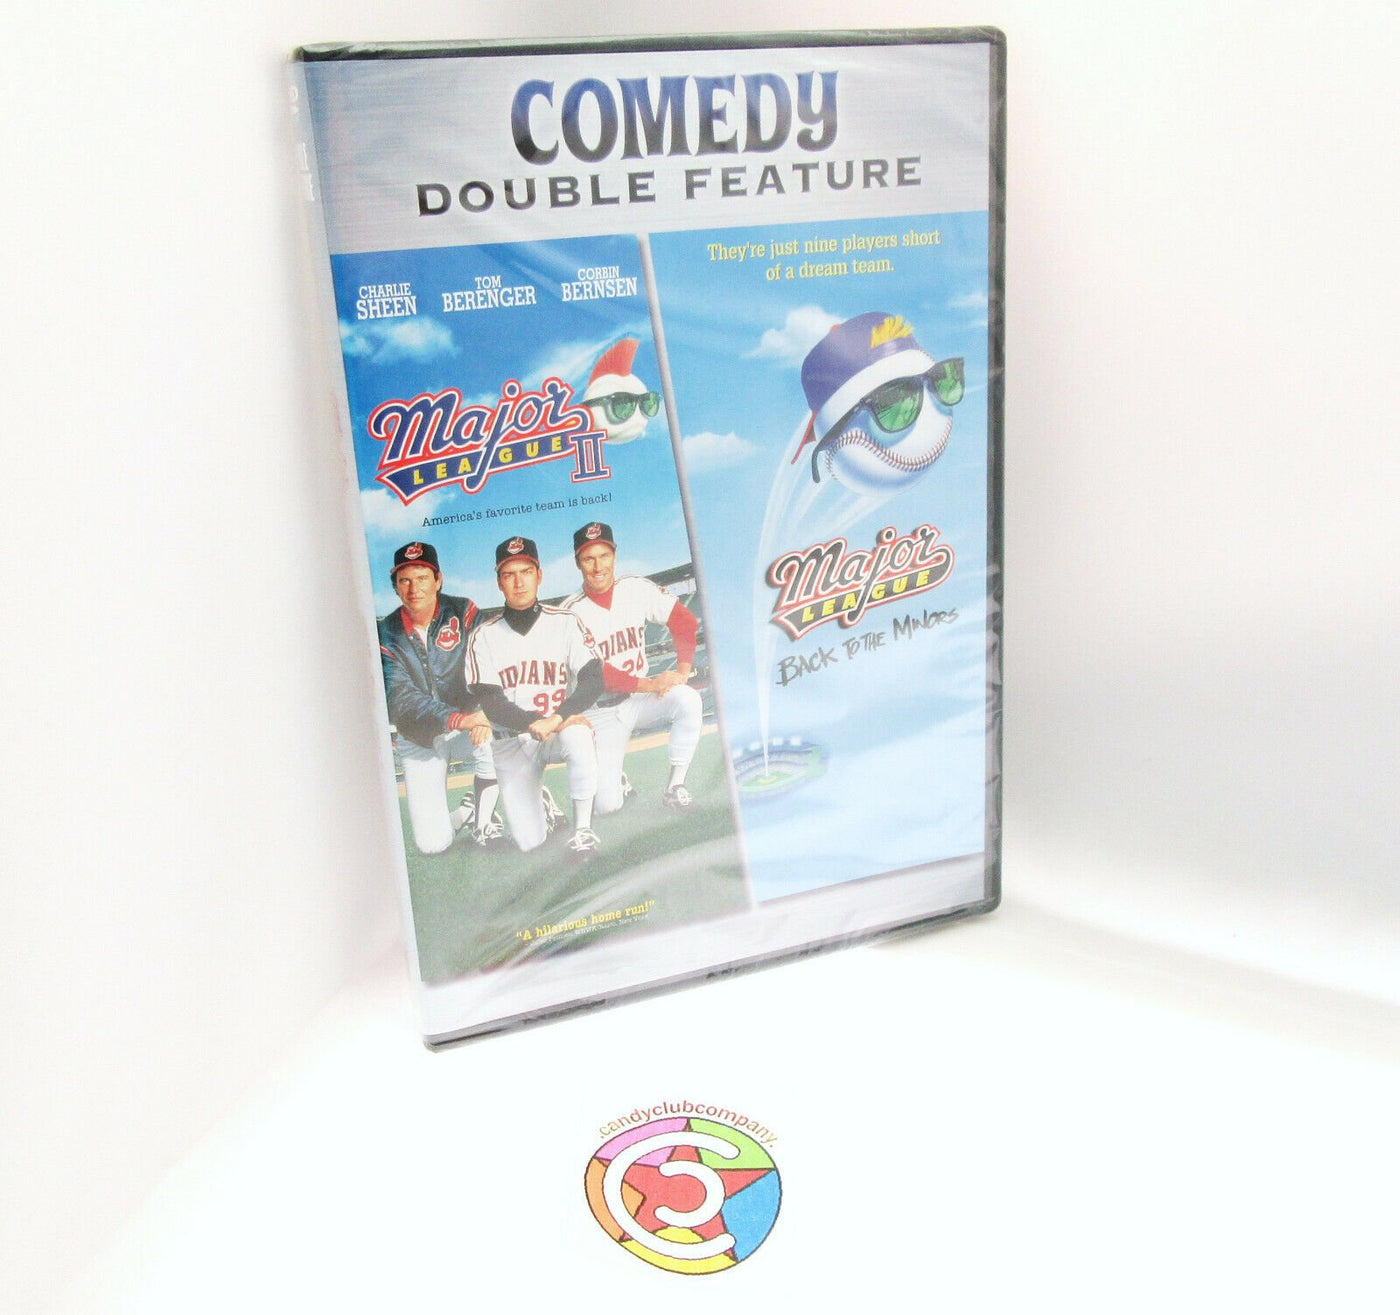 Major League 2 & Major league Back to the Minors  ~ 1994, 1998 ~ Movie ~ New DVD